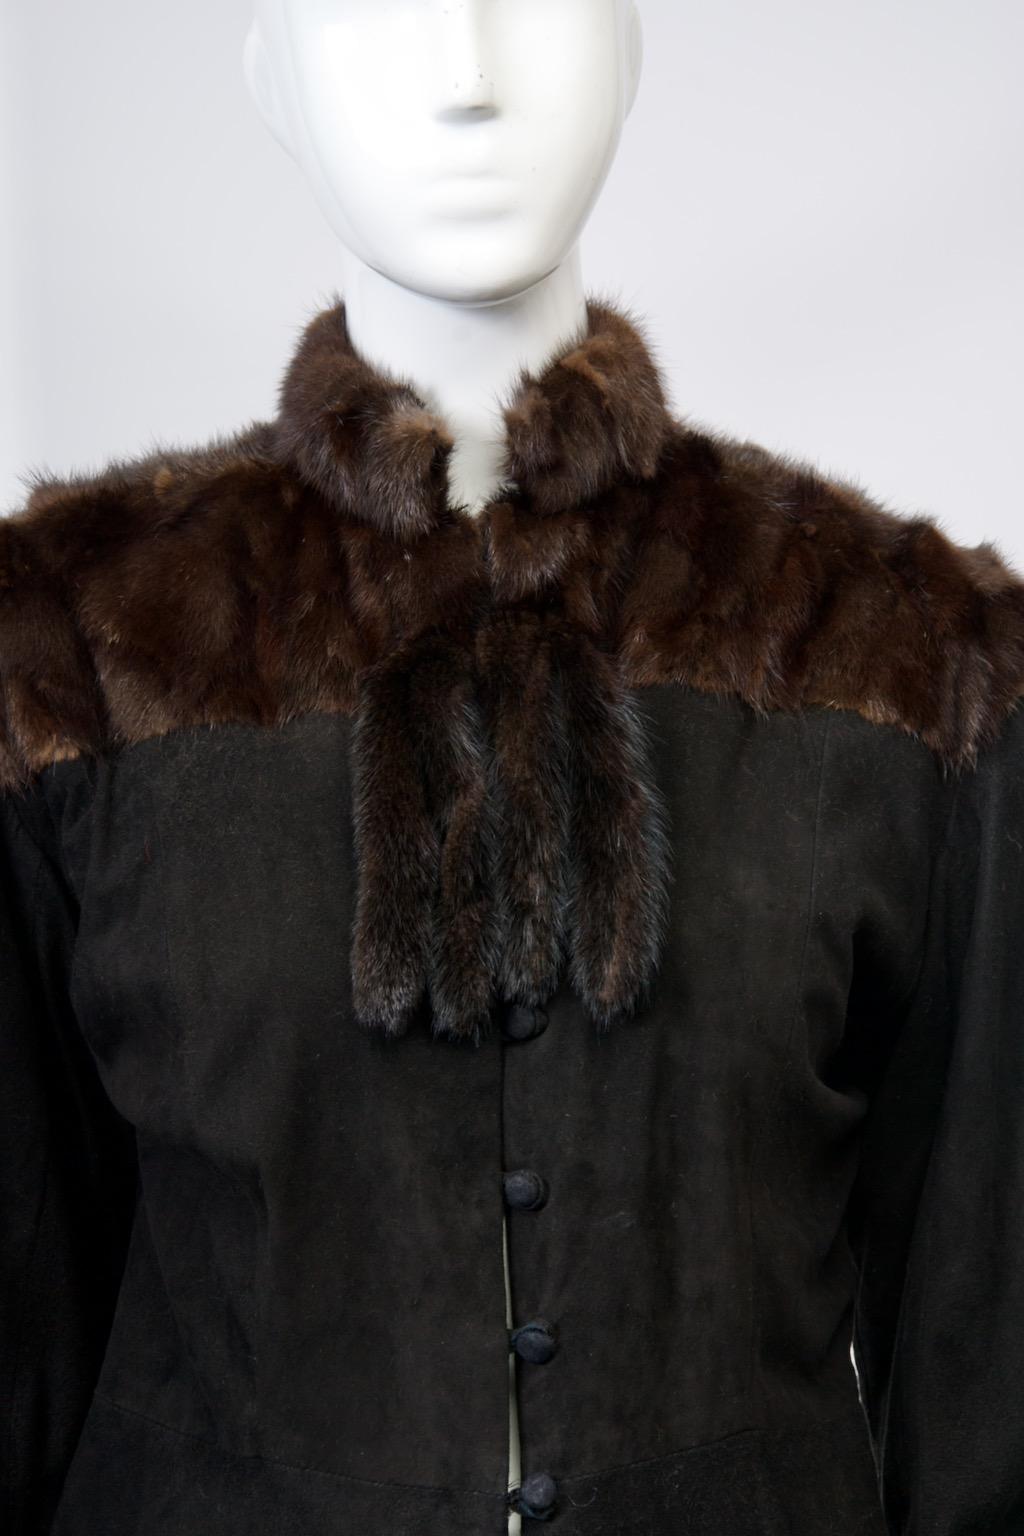 A novel vintage piece from the 1980s, this jacket is crafted of supple black suede and features a yoke, mandarin collar, and two pairs of tails at the neck of dark brown mink. The set-in sleeves taper to the wrist, where they are trimmed with